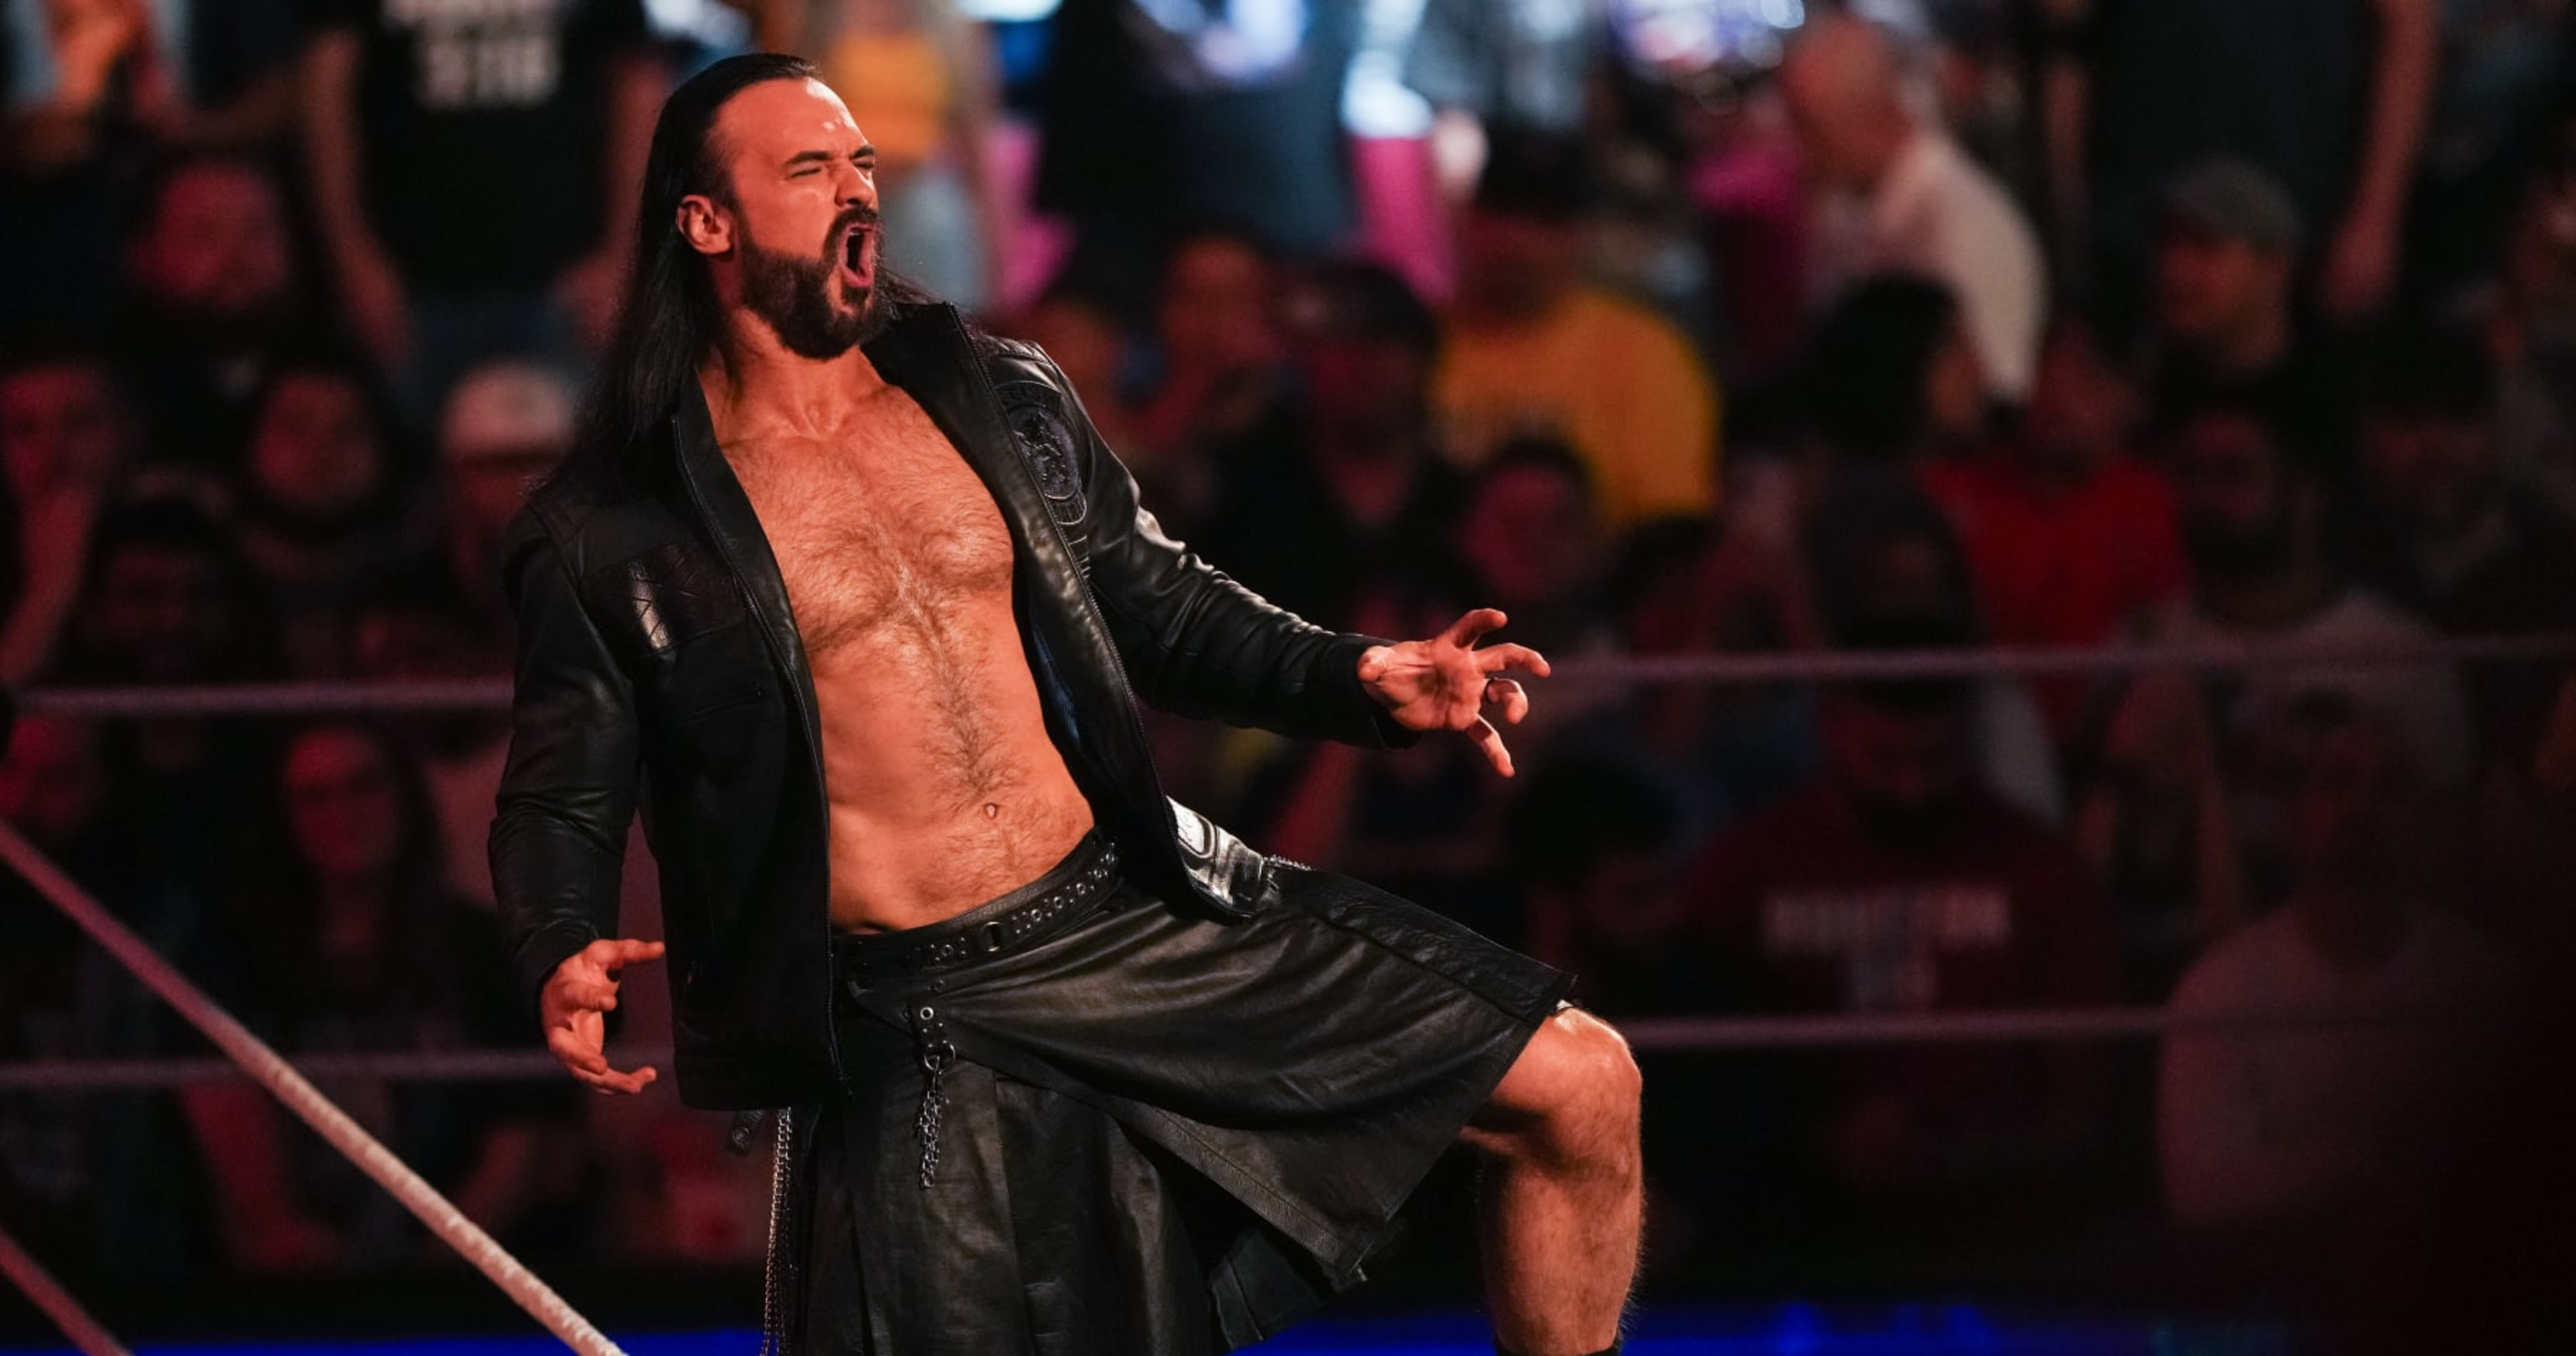 Backstage WWE and AEW Rumors: Latest on Drew McIntyre, Giulia, Miro, and More